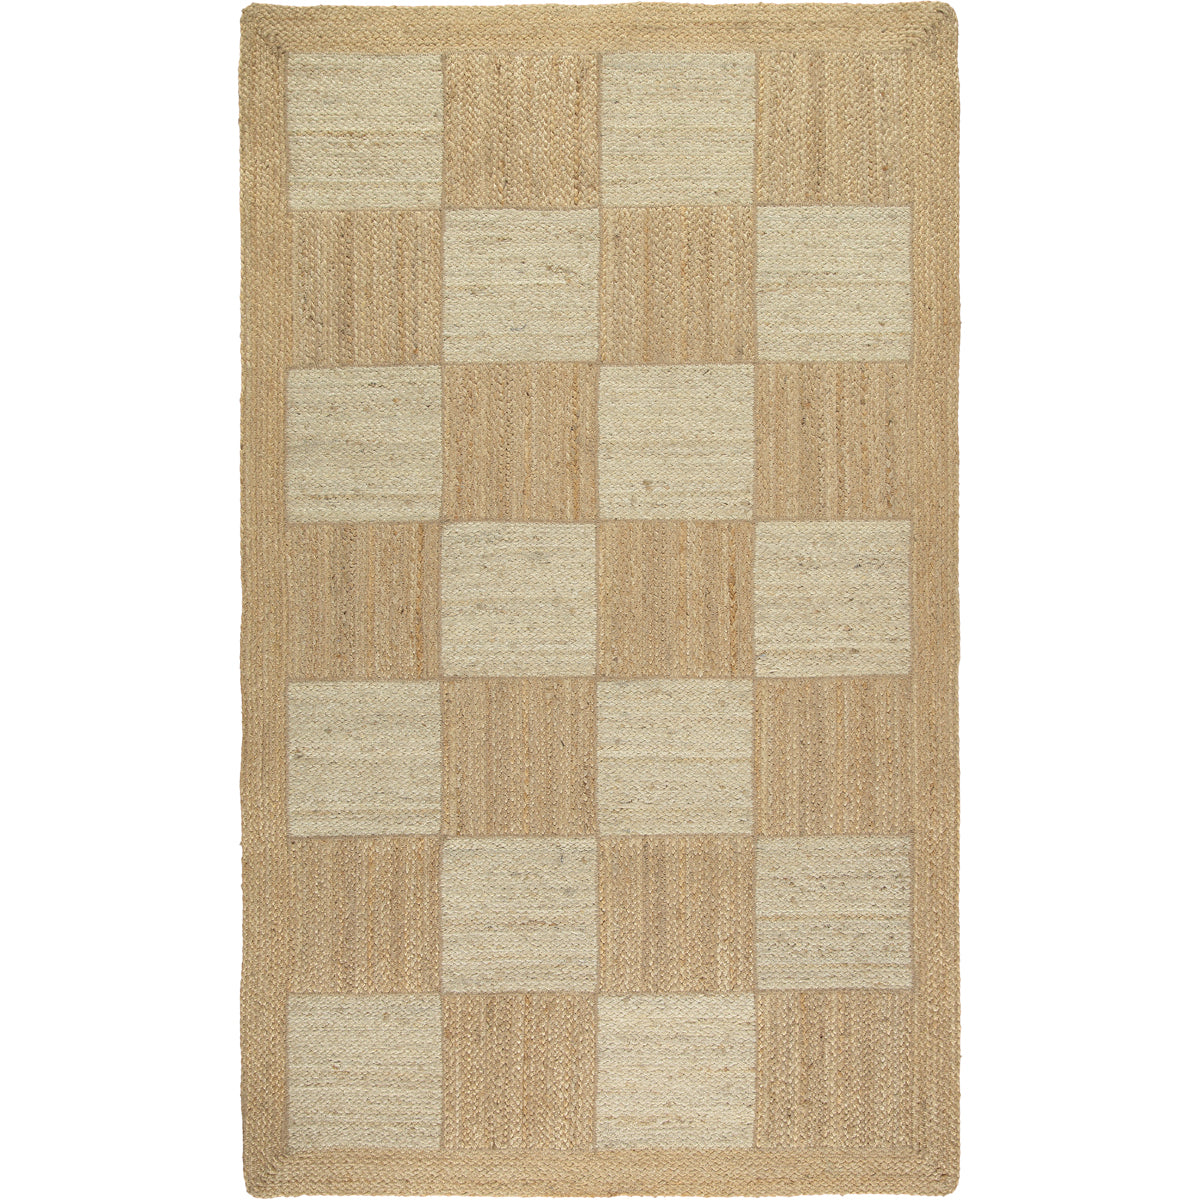 The Braided Rug Company Jute Rug, Natural / White Tiles